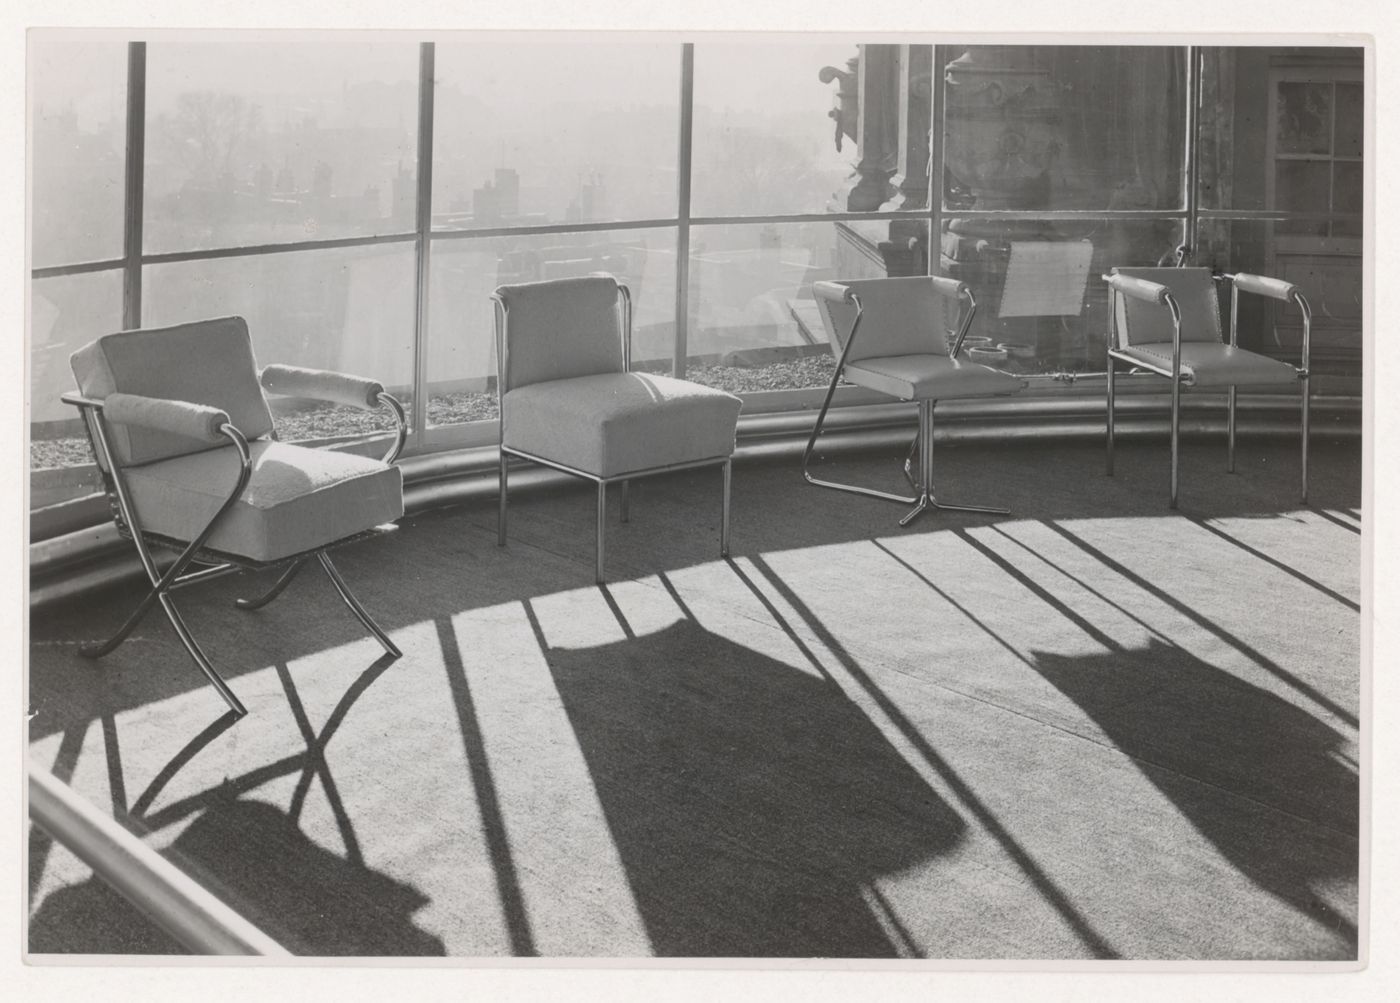 View of chairs designed by J.J.P. Oud for Metz and Co., Amsterdam, Netherlands